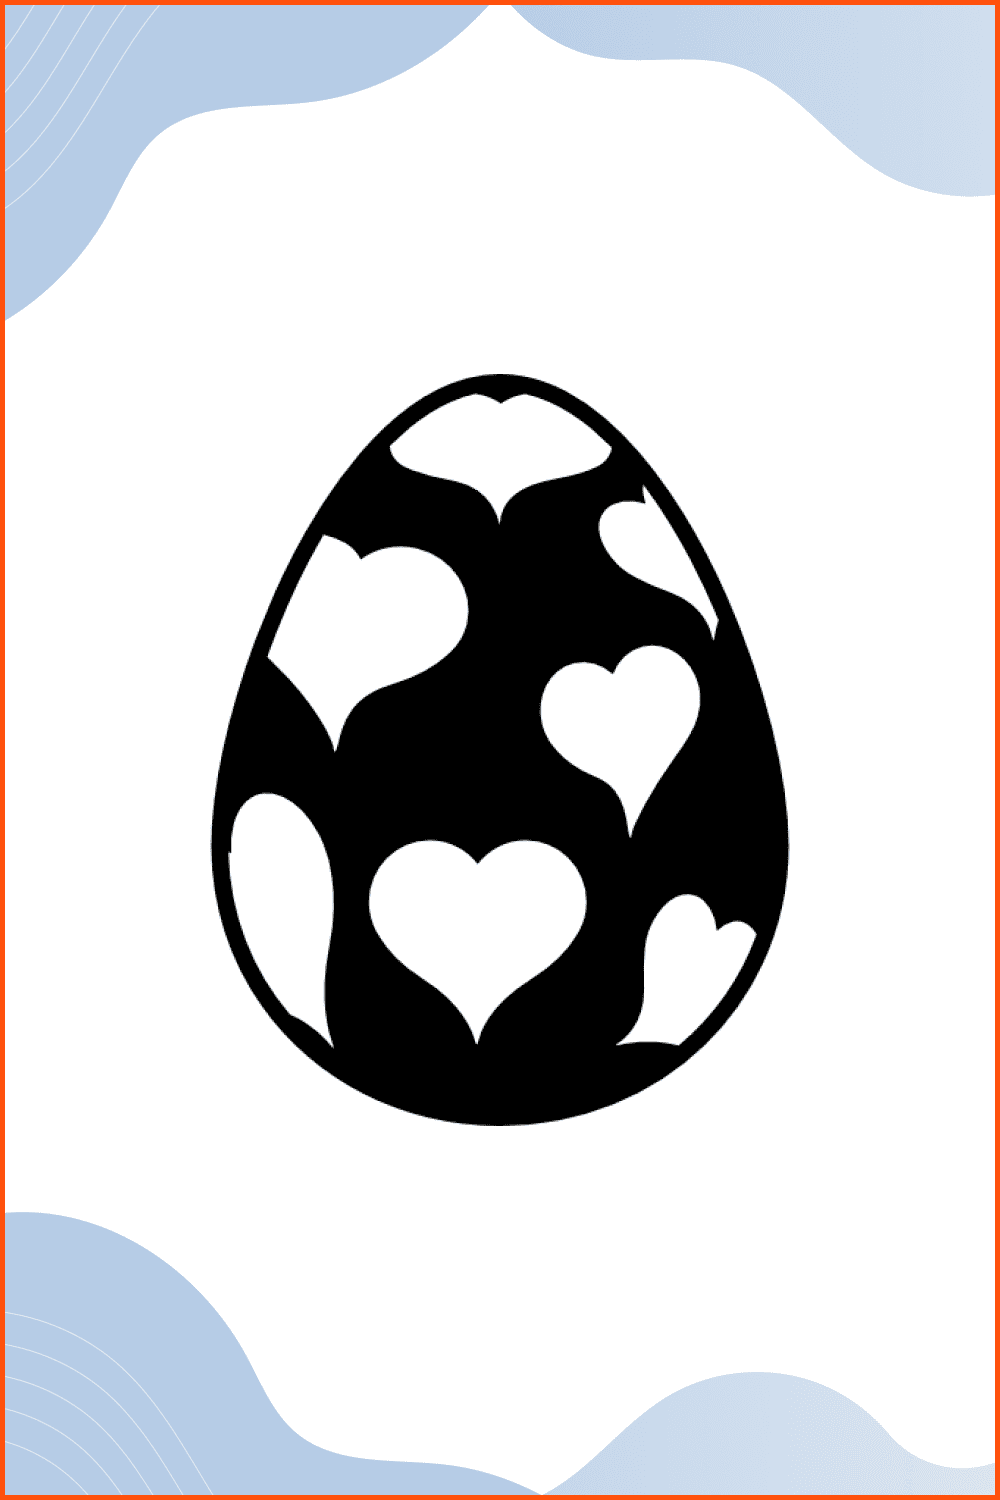 Easter egg with hearts.